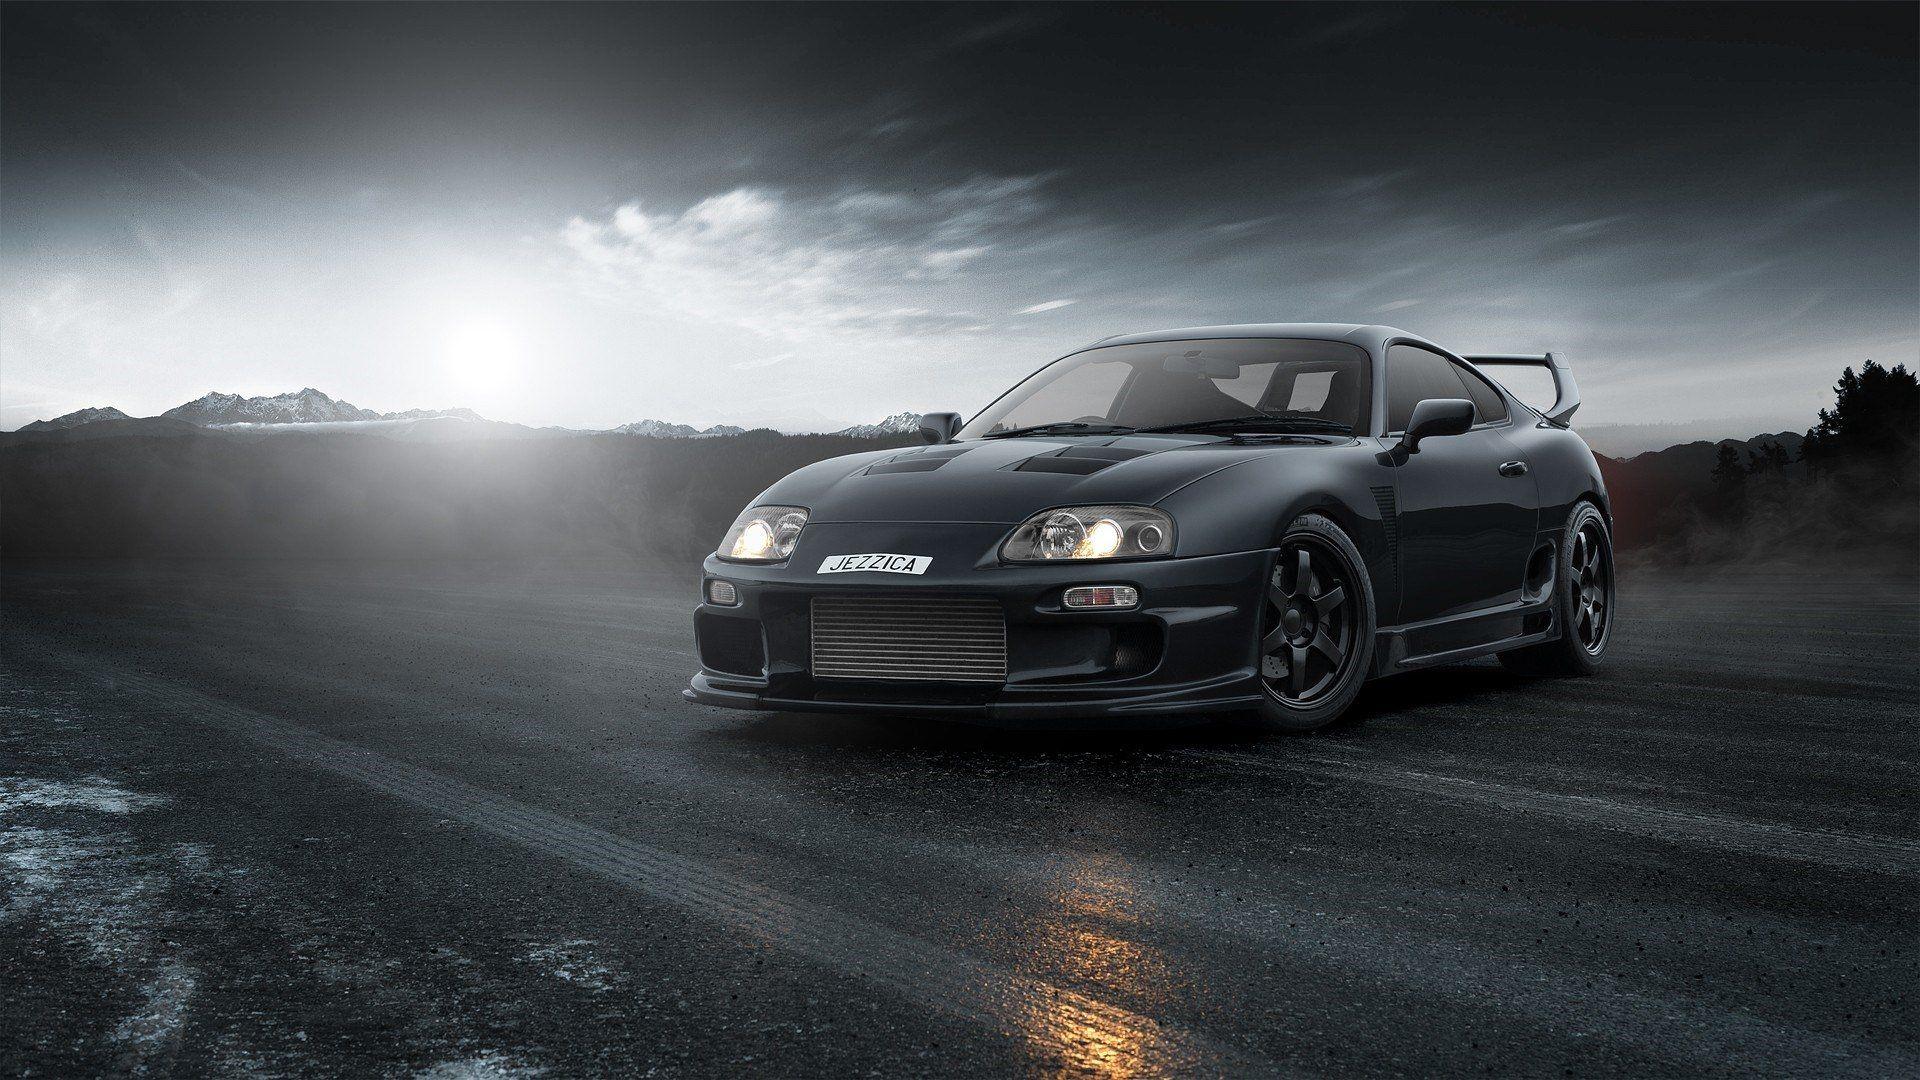 Toyota Supra HD Wallpaper and Background